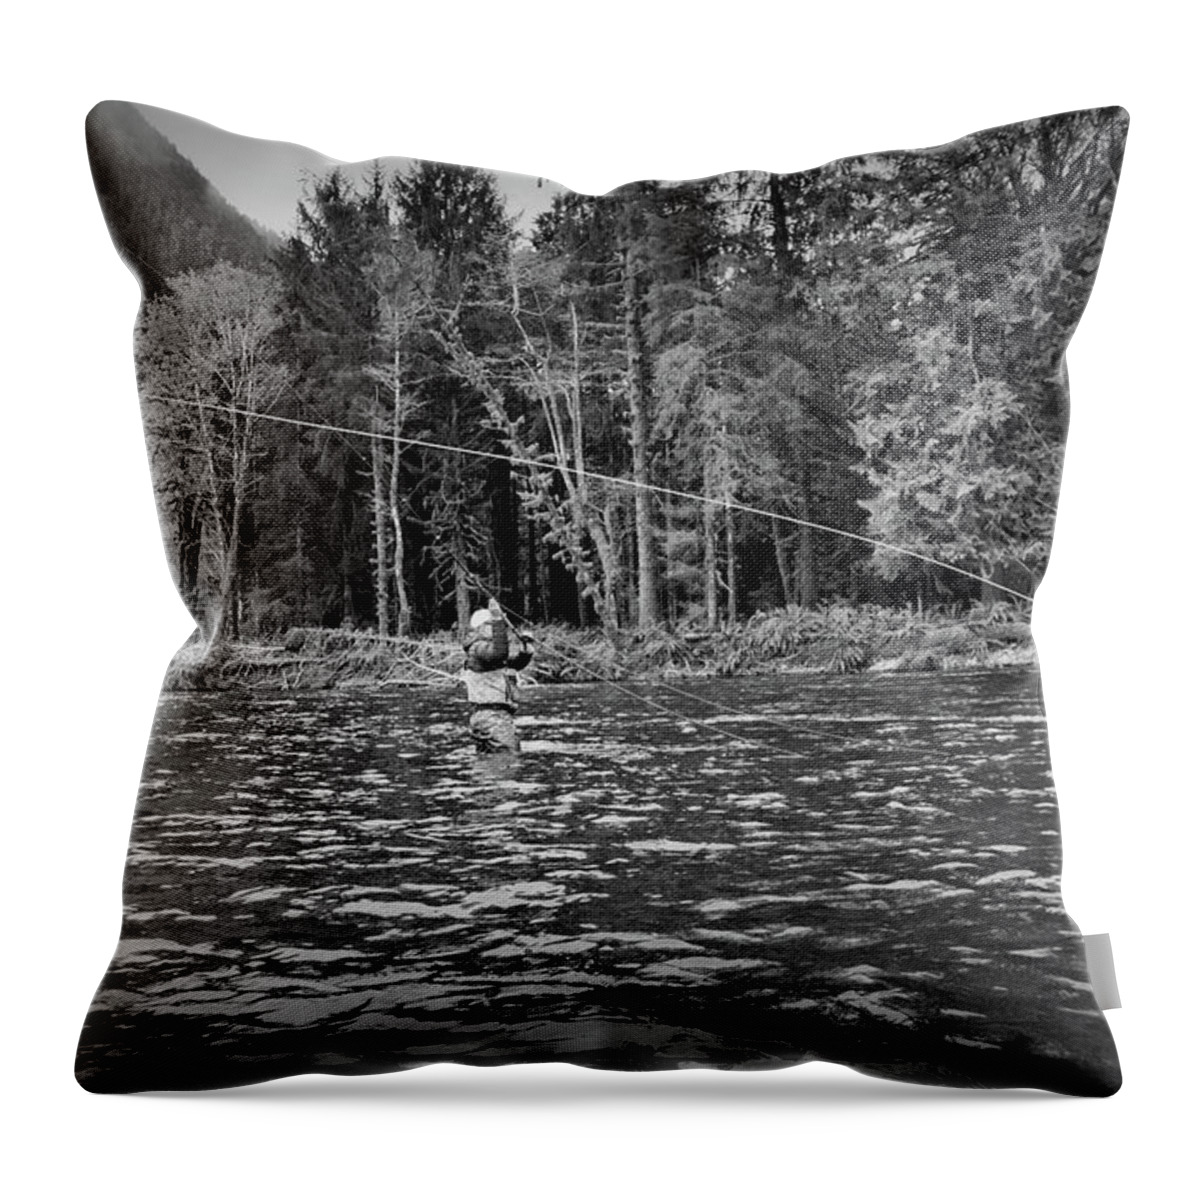  Throw Pillow featuring the photograph Fly on the Swing by Jason Brooks